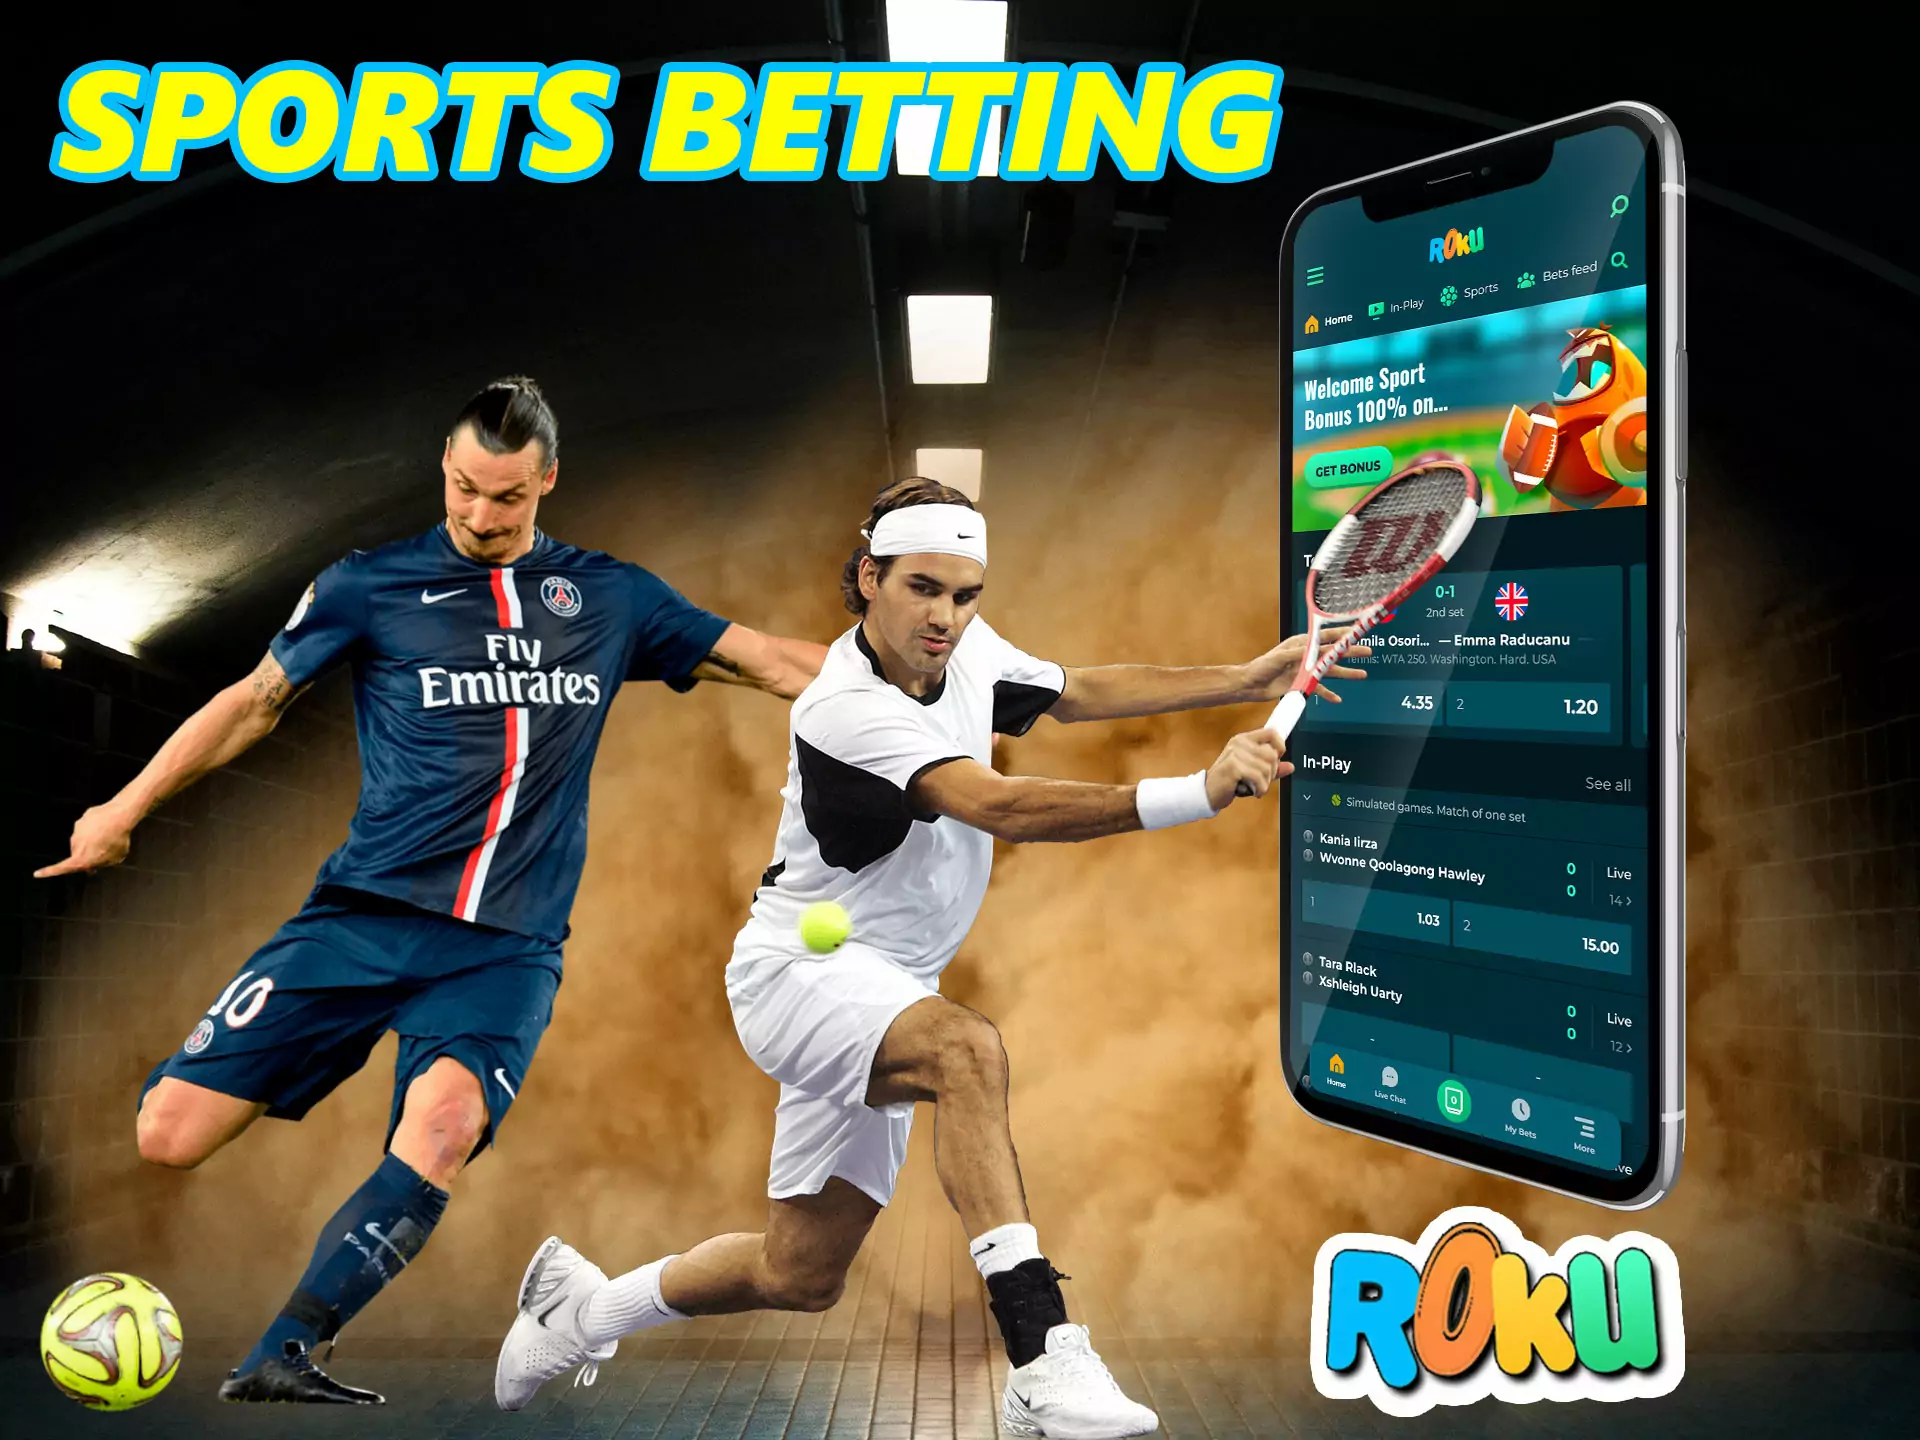 This is the best bookmaker in India, has a huge list of sports, simple and clear navigation.